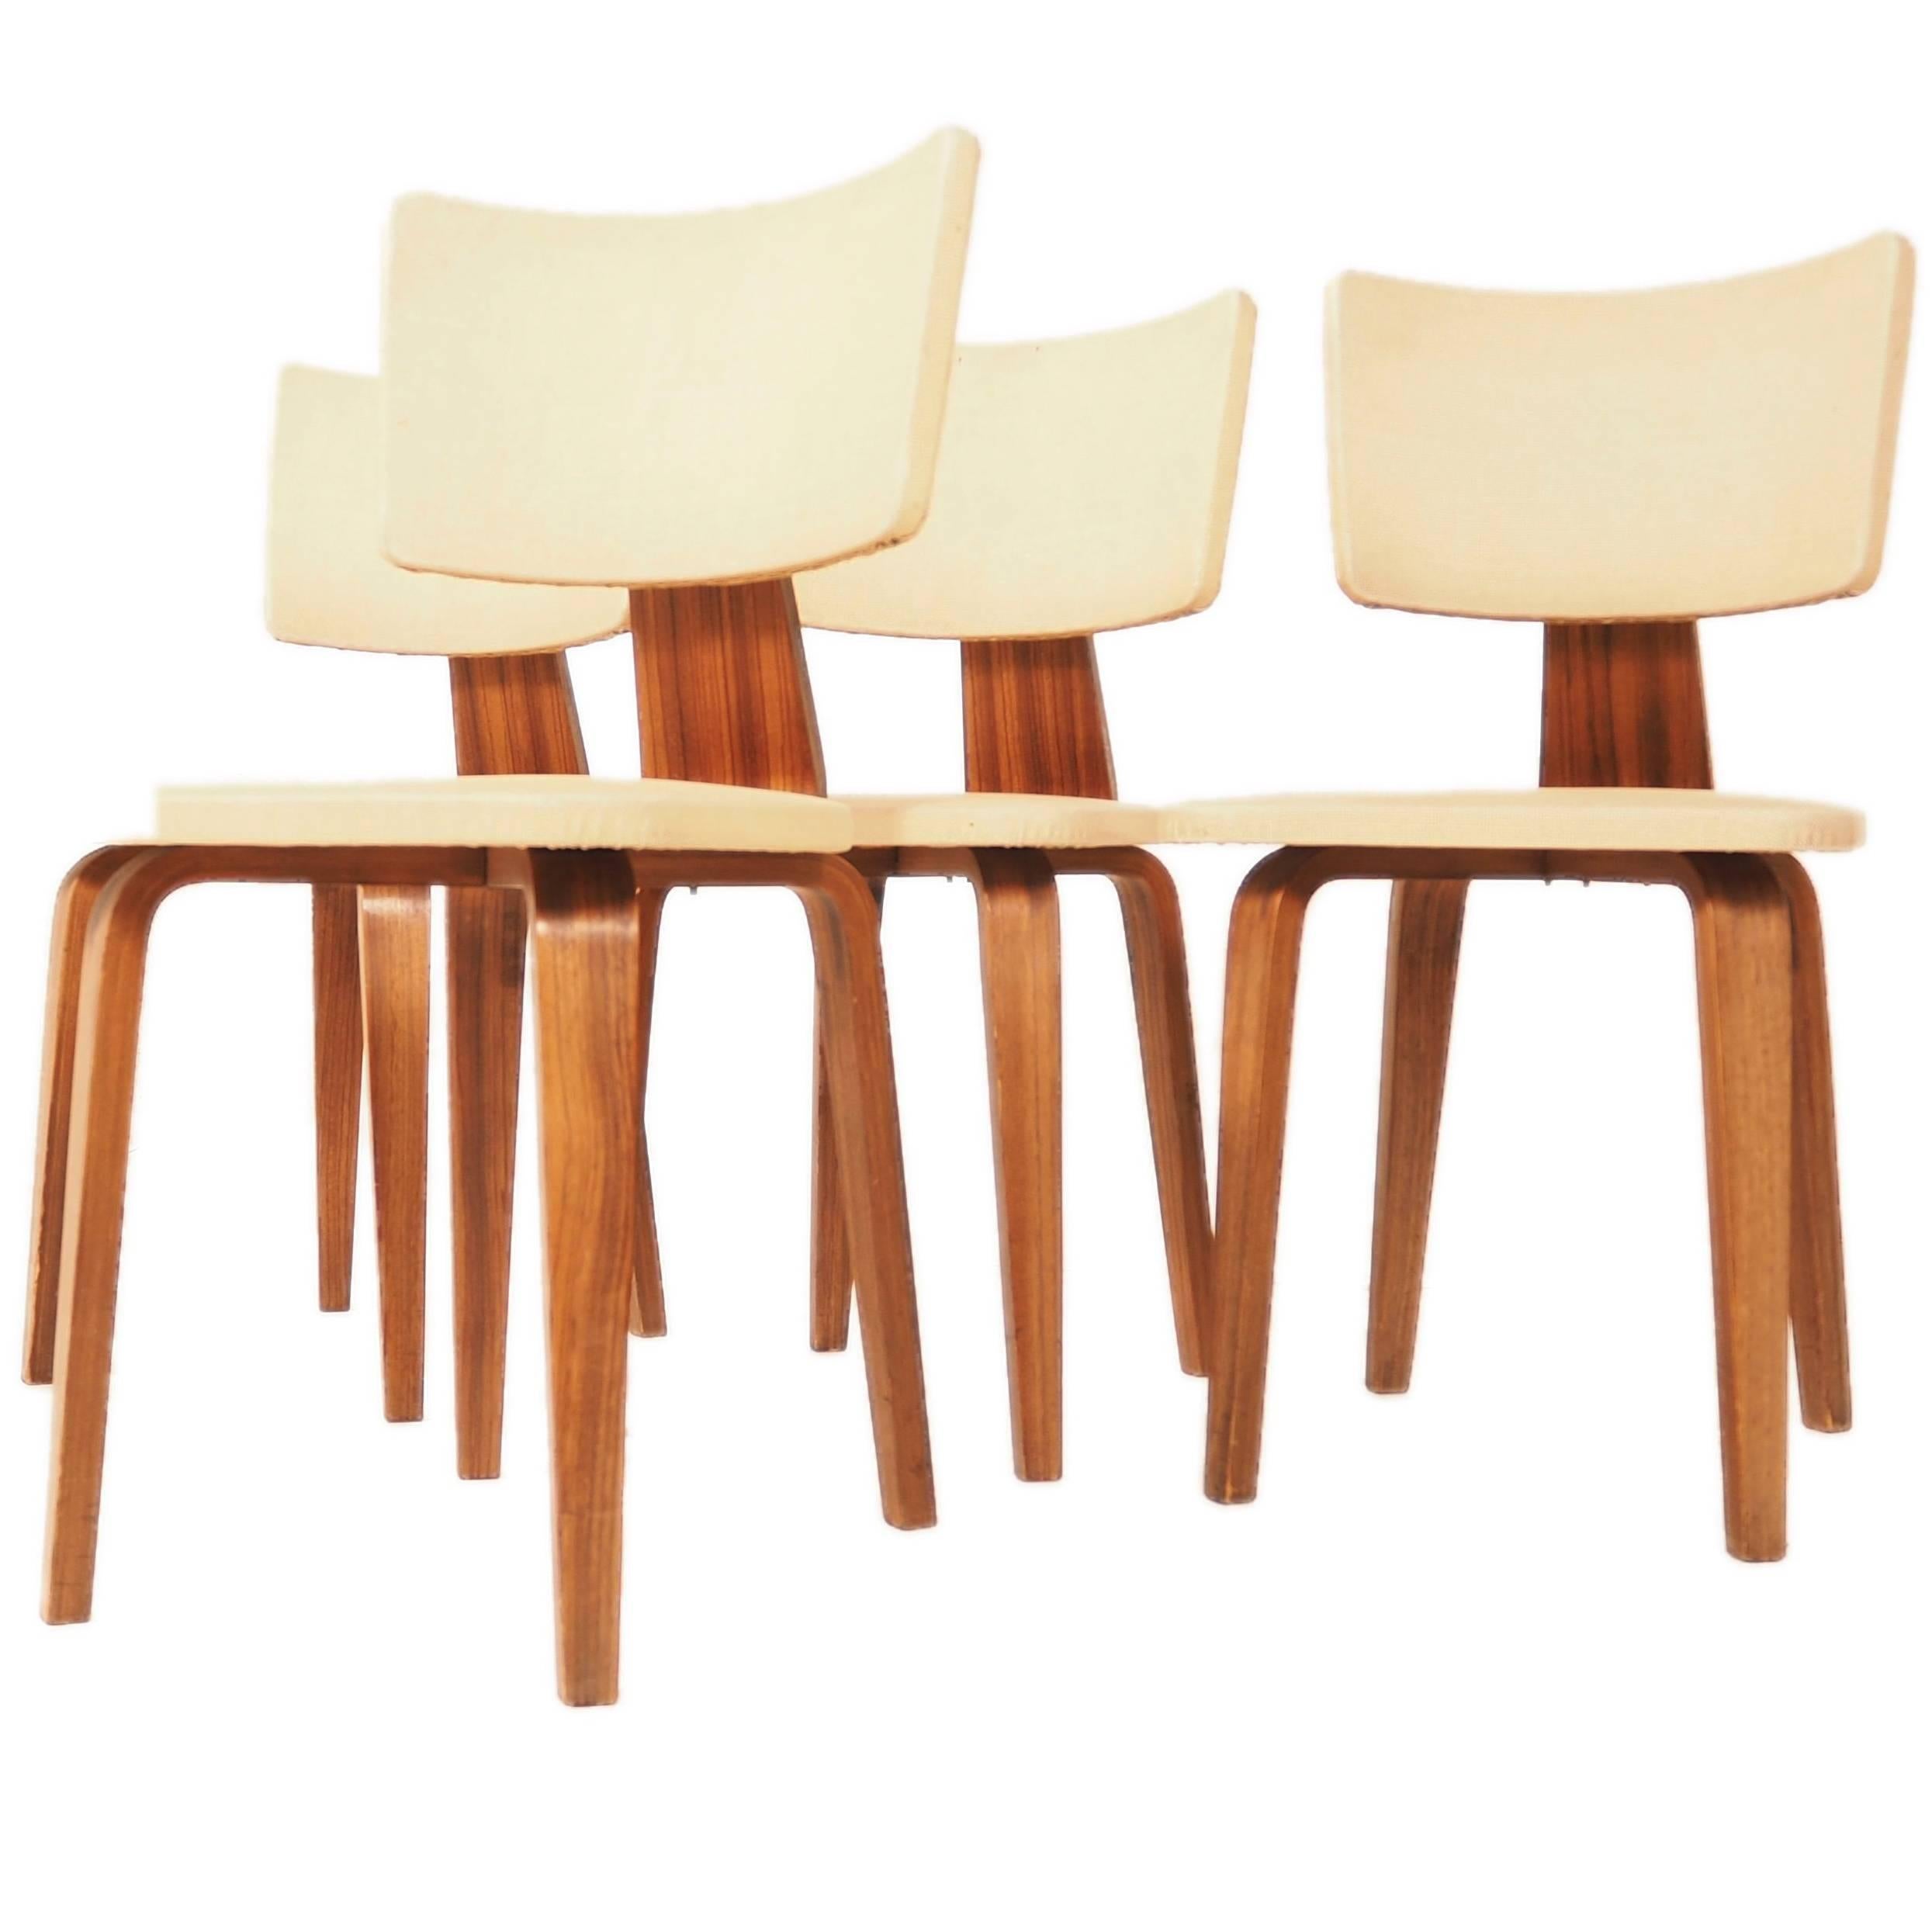 Set of Four Dining Chairs by Cor Alons for Den Boer, 1950s For Sale